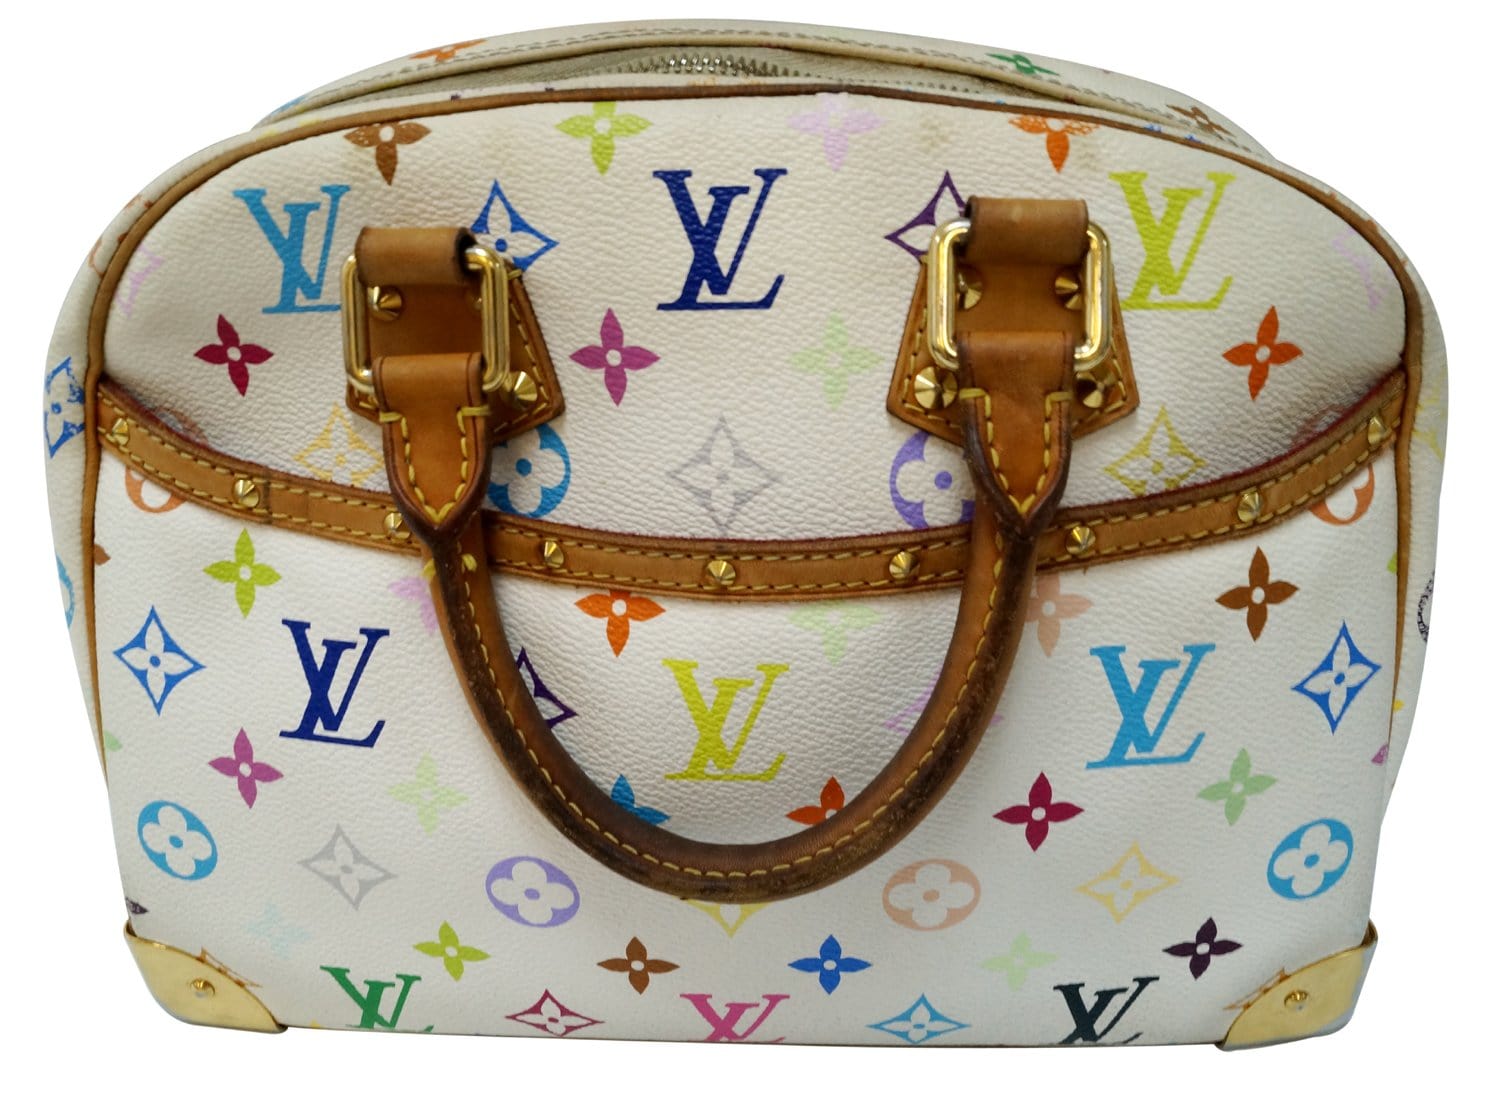 Women's Louis Vuitton Satchel bags and purses from $2,684